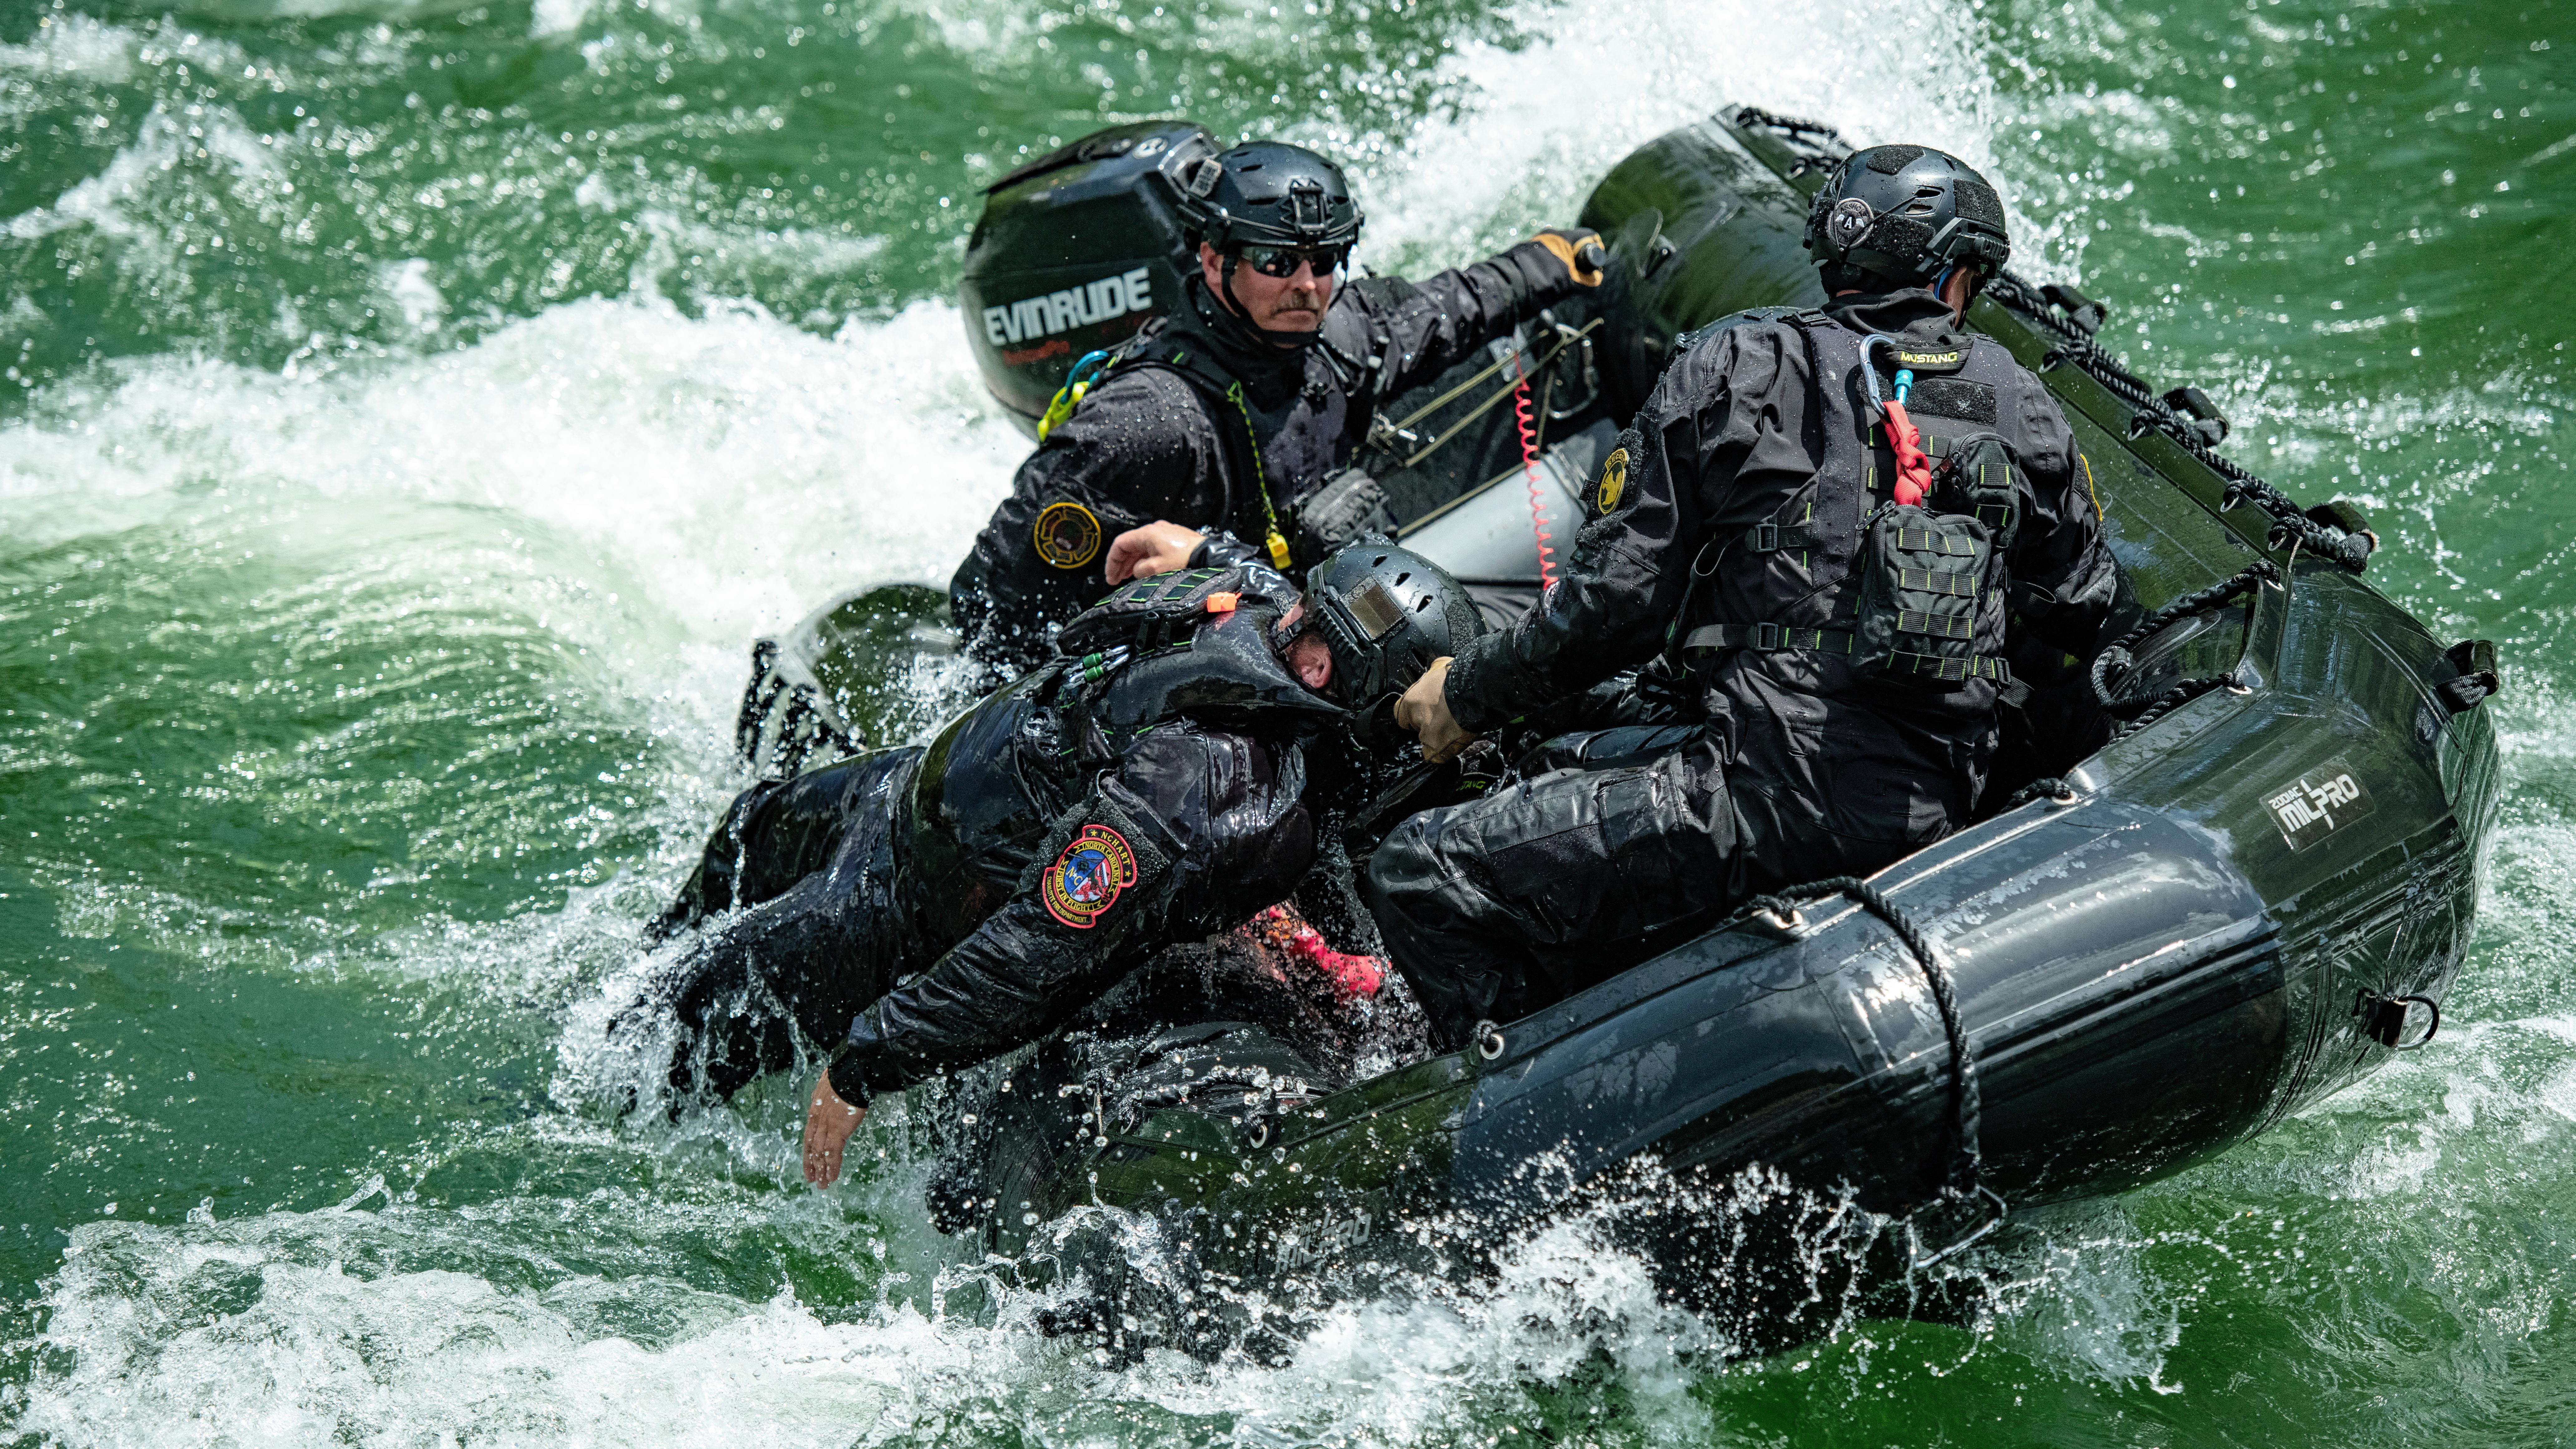 Behind the scenes in local swift water rescue - The Rocky Mountain